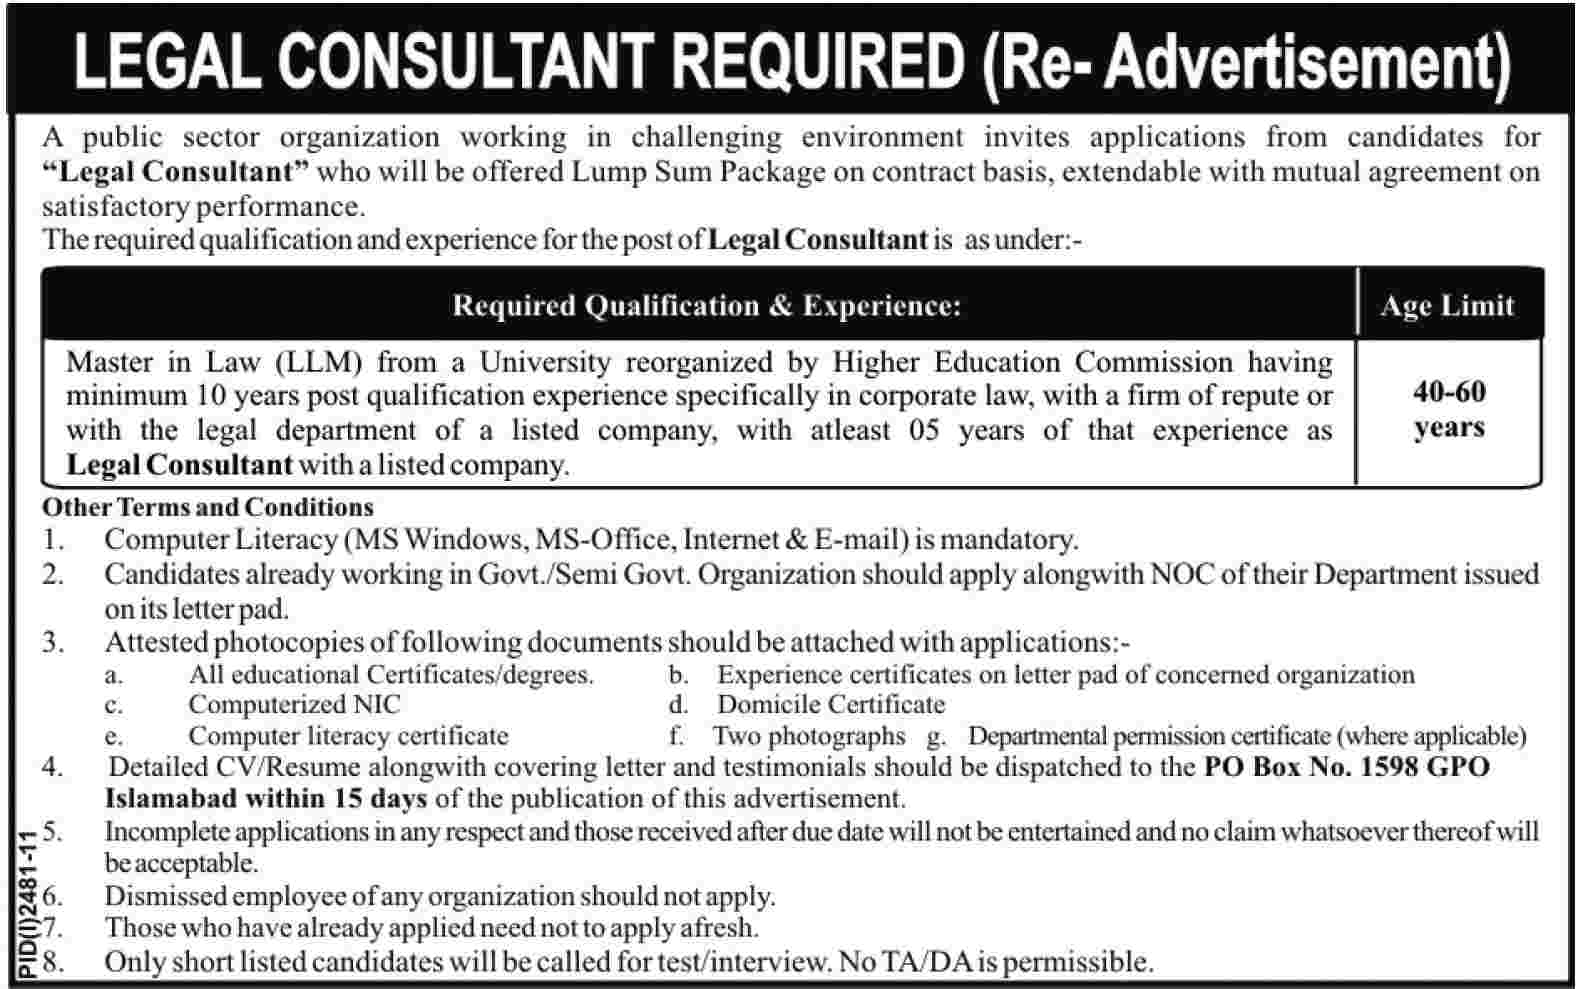 Legal Consultant Required by Public Sector Organization